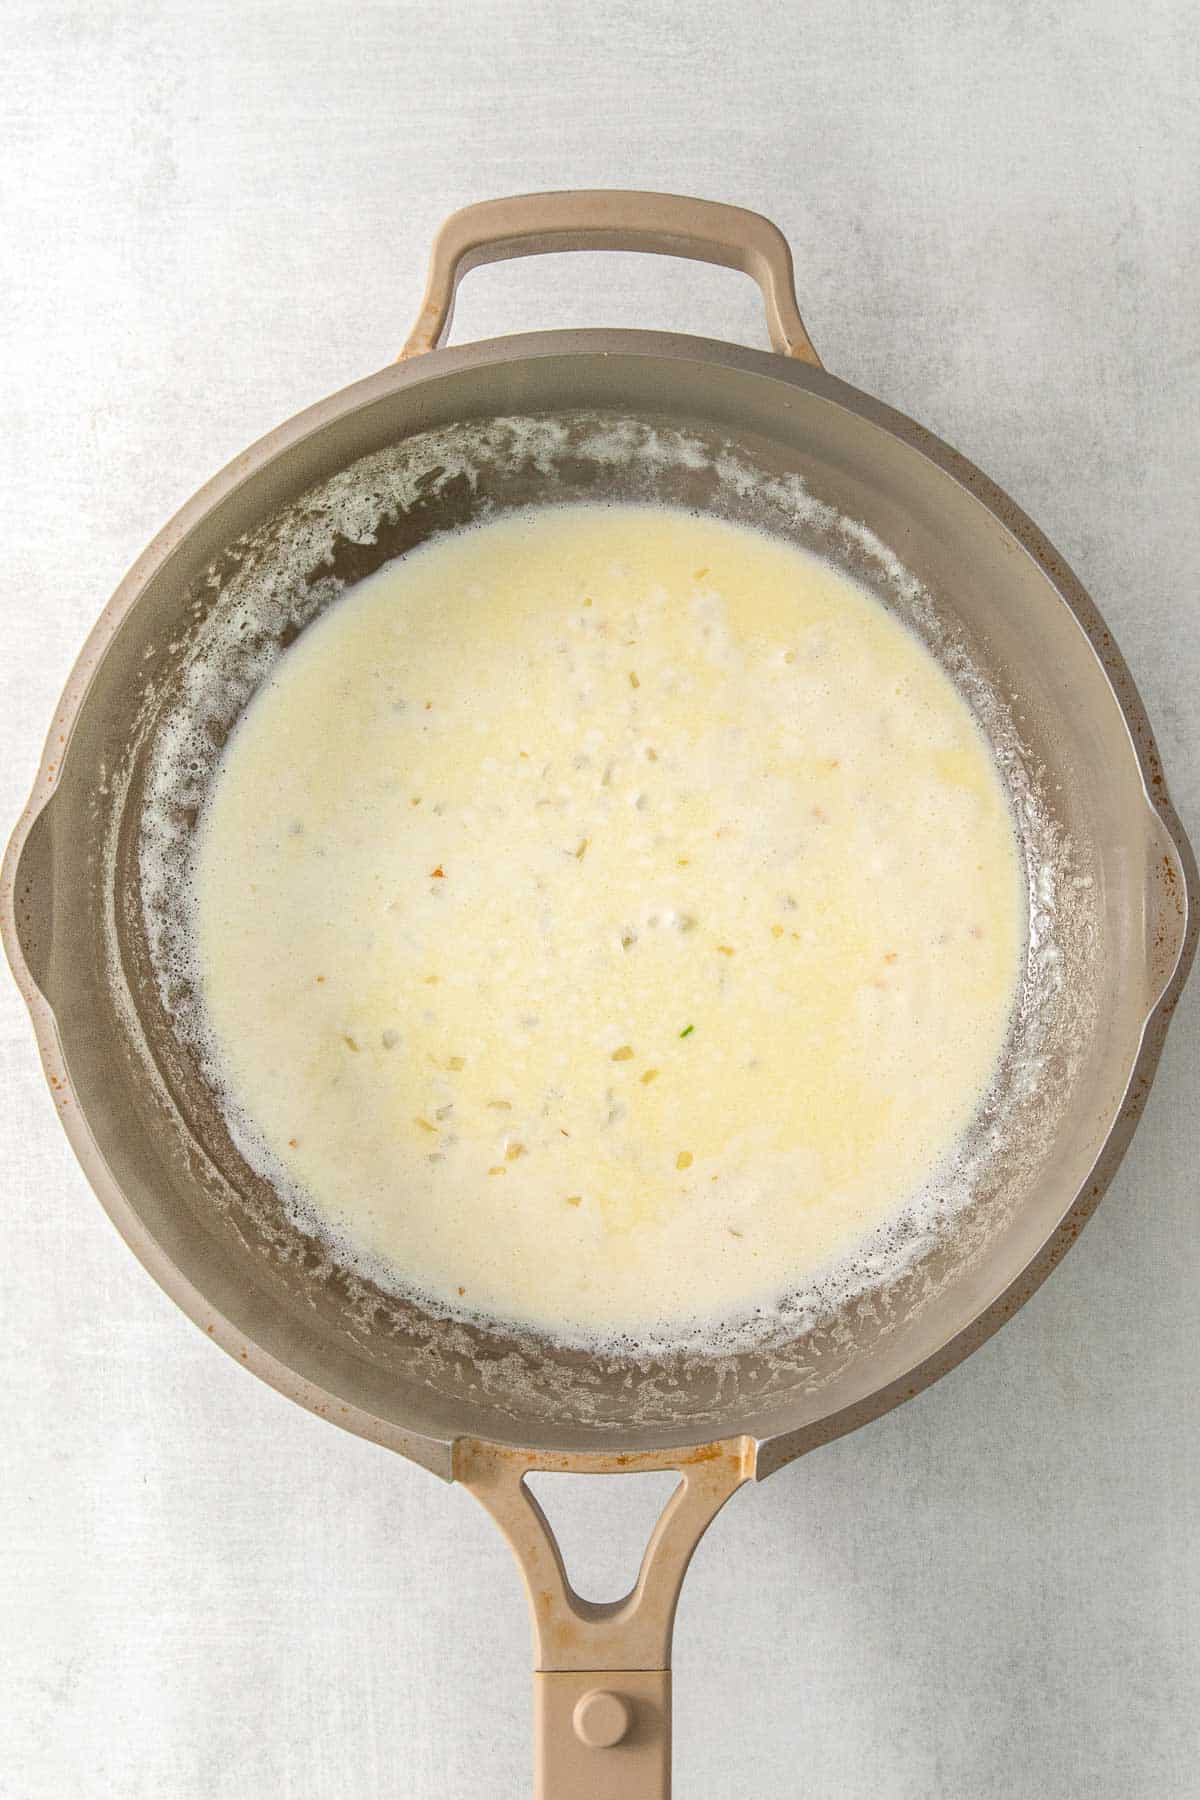 Heavy cream and minced garlic and parmesan cheese added to butter mixture in saucepan.